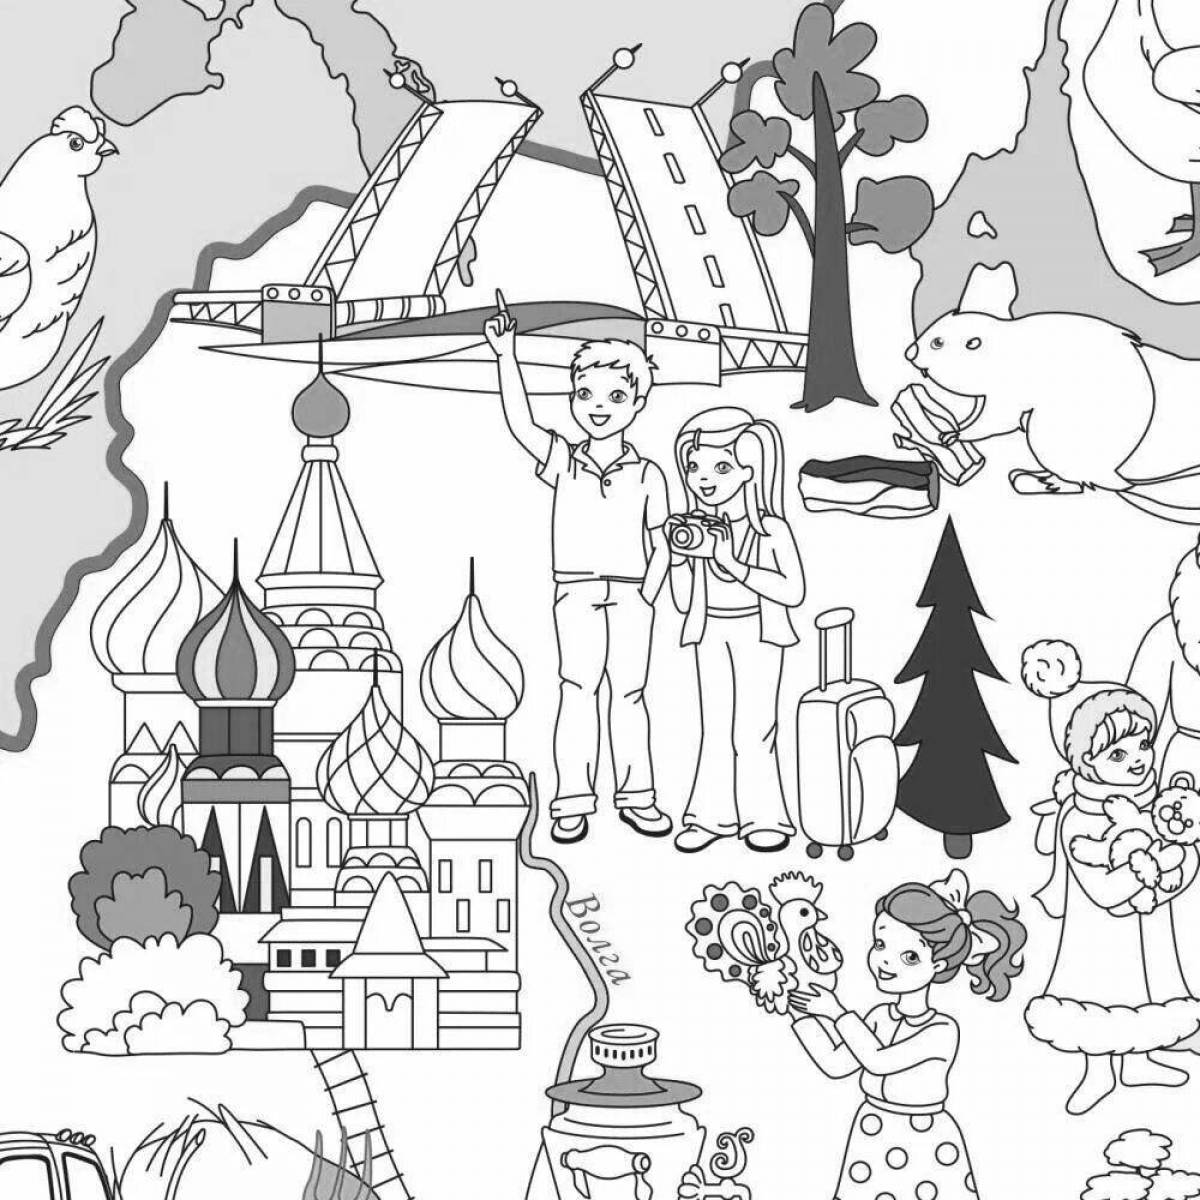 Fairytale coloring Russia my homeland for children